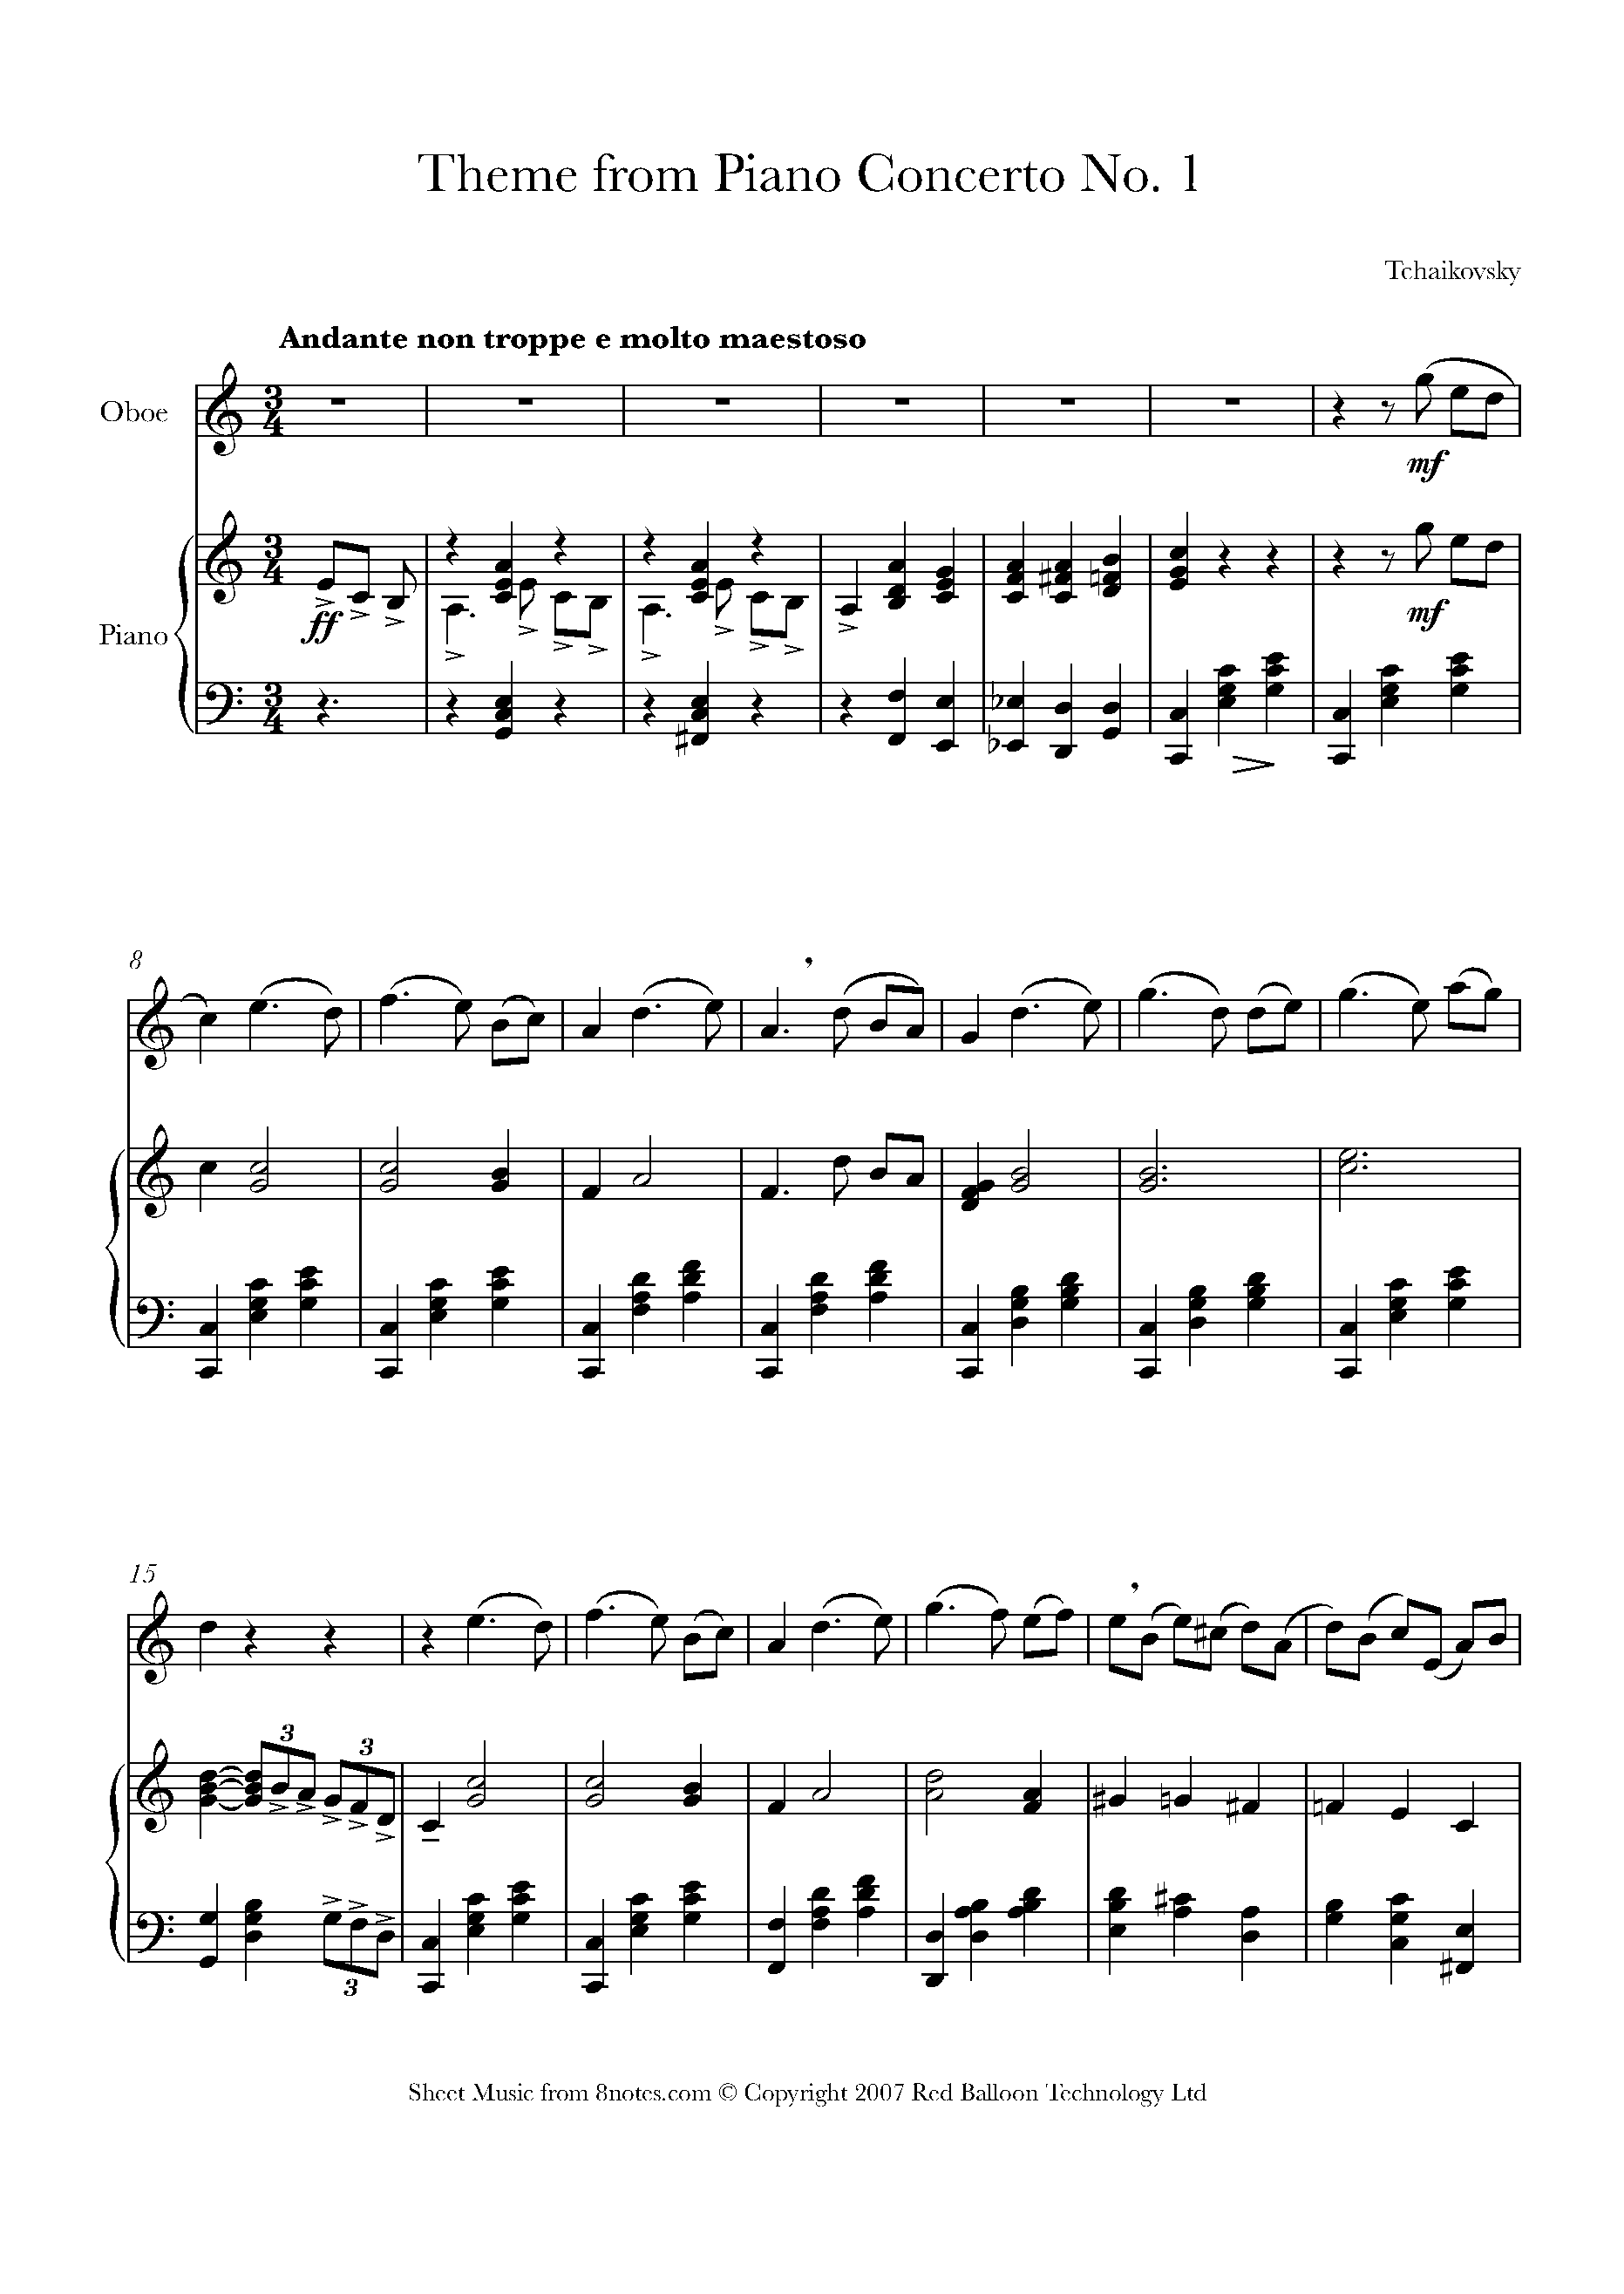 Tchaikovsky - Theme from Piano Concerto No.1 Sheet music for Oboe